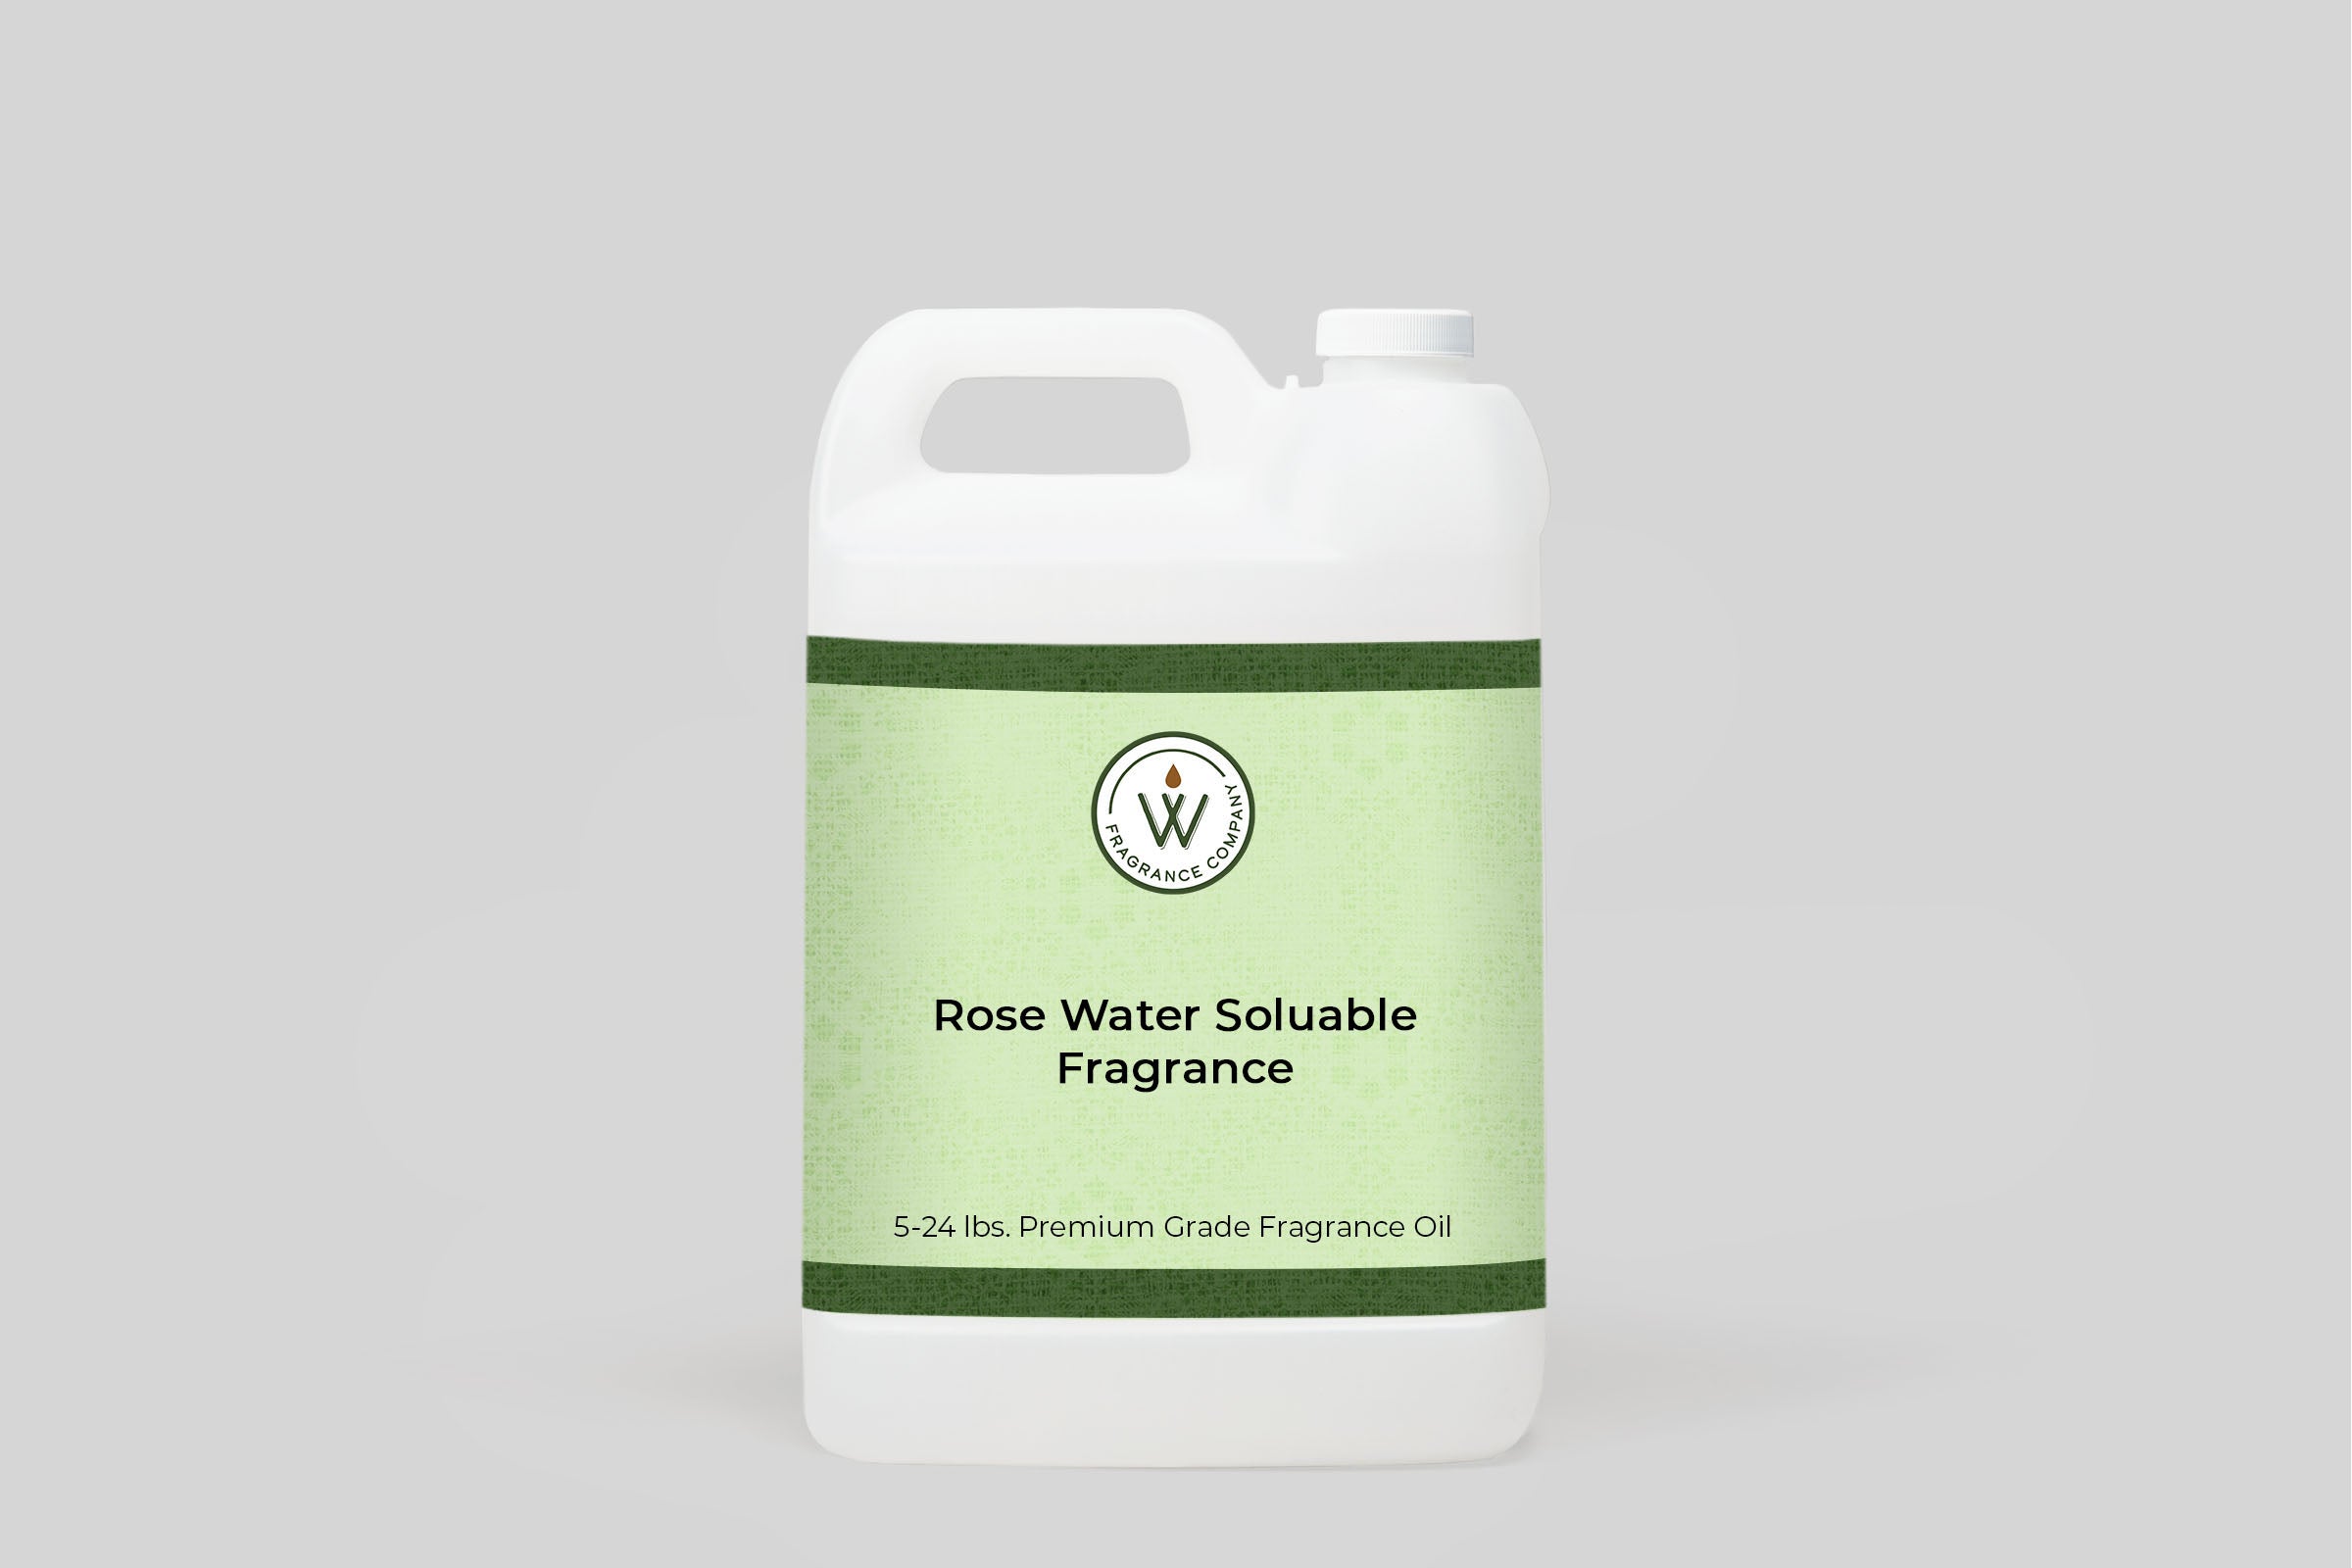 Rose Water Soluble Fragrance